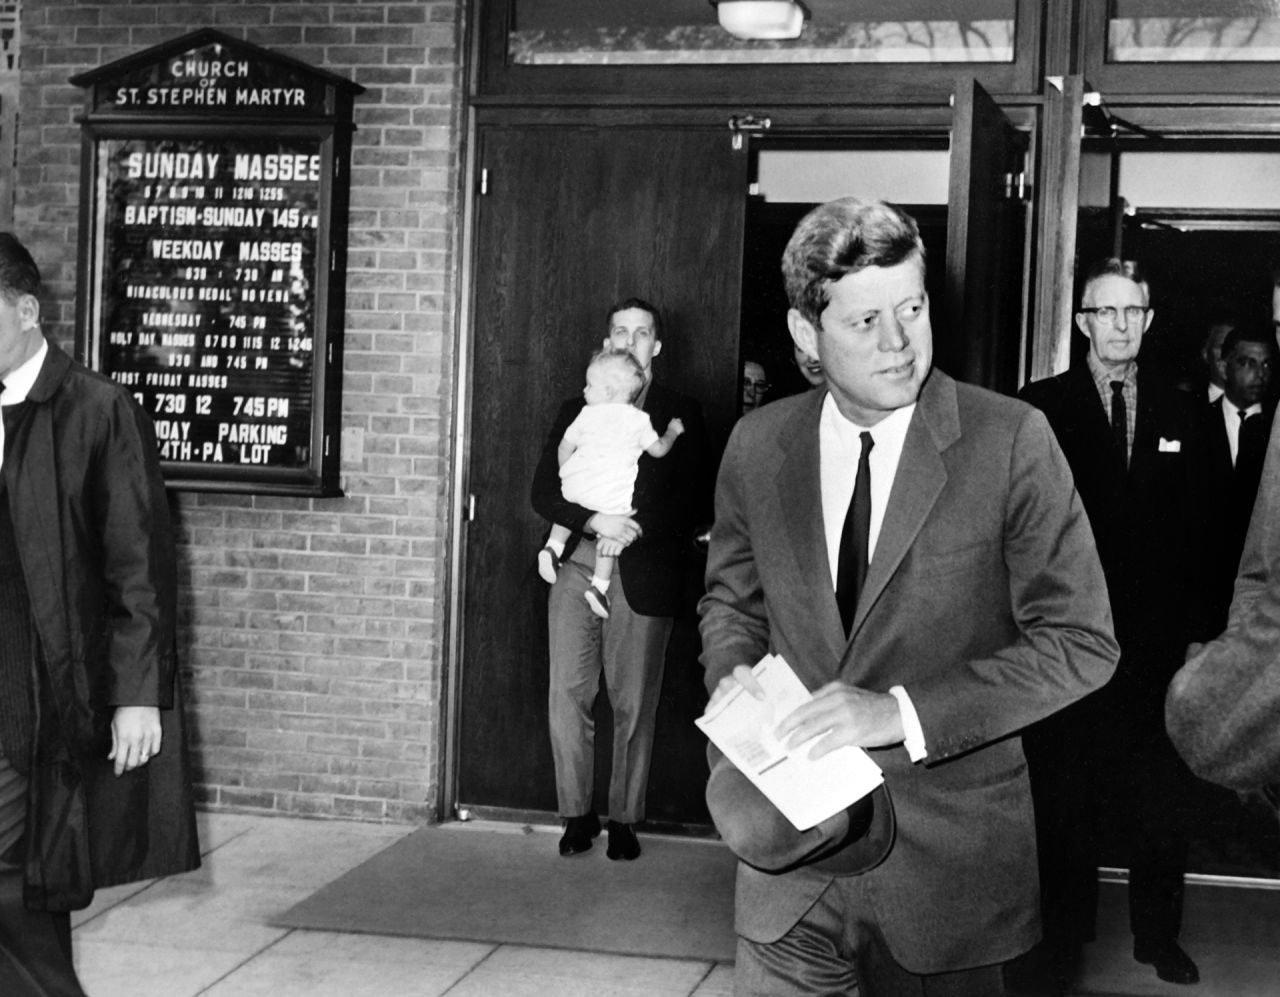 President John F. Kennedy leaves St. Stephen Martyr Catholic Church after attending mass on October 29, 1962, in Washington, just a few hours before the Cuban missile crisis began to resolve peacefully.